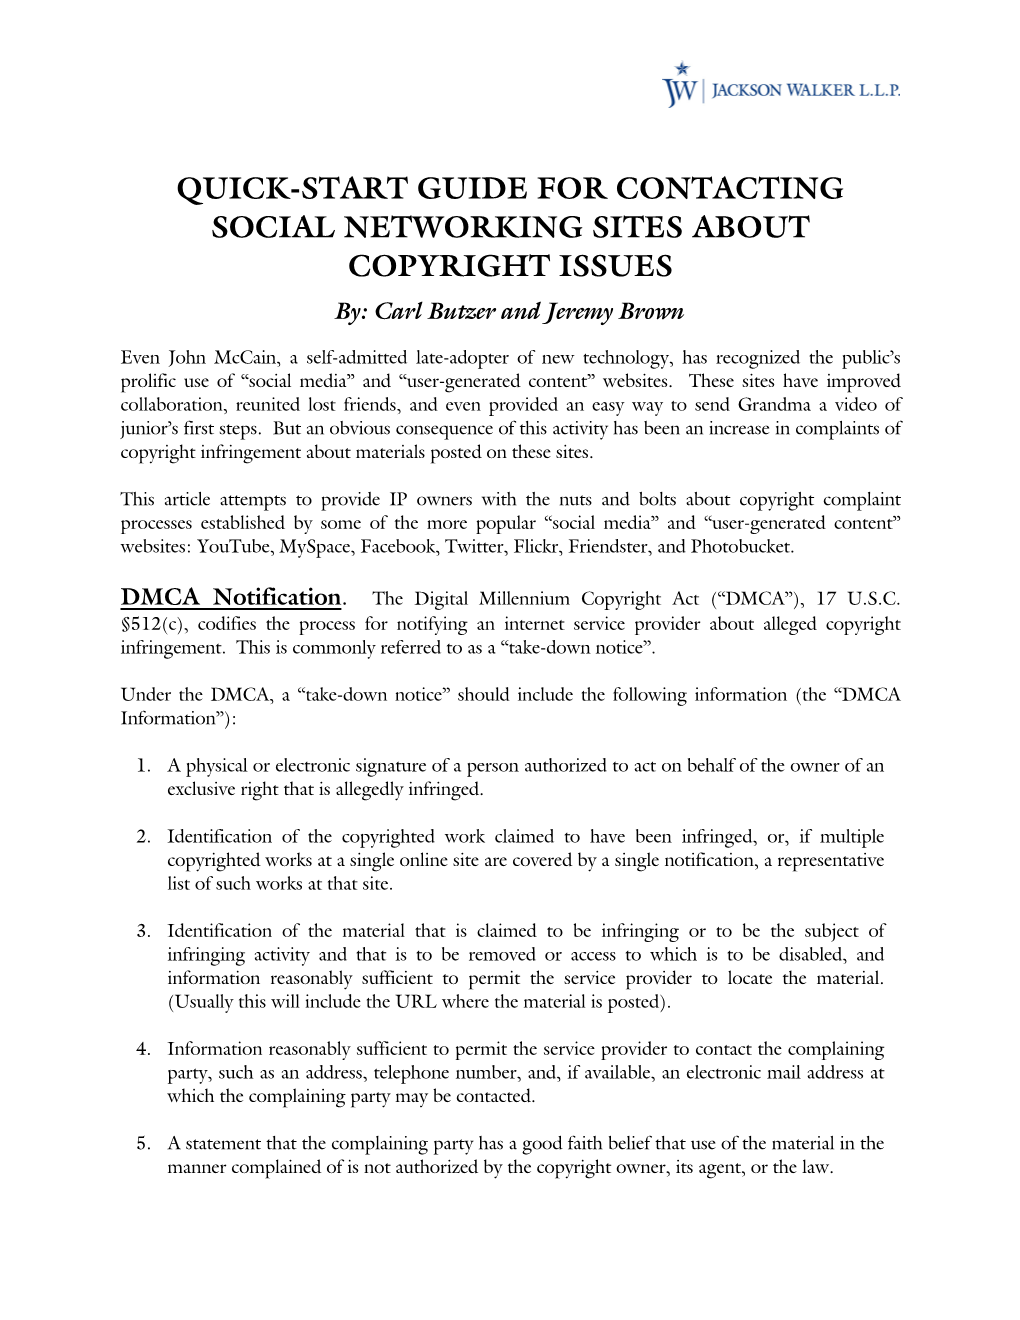 QUICK-START GUIDE for CONTACTING SOCIAL NETWORKING SITES ABOUT COPYRIGHT ISSUES By: Carl Butzer and Jeremy Brown